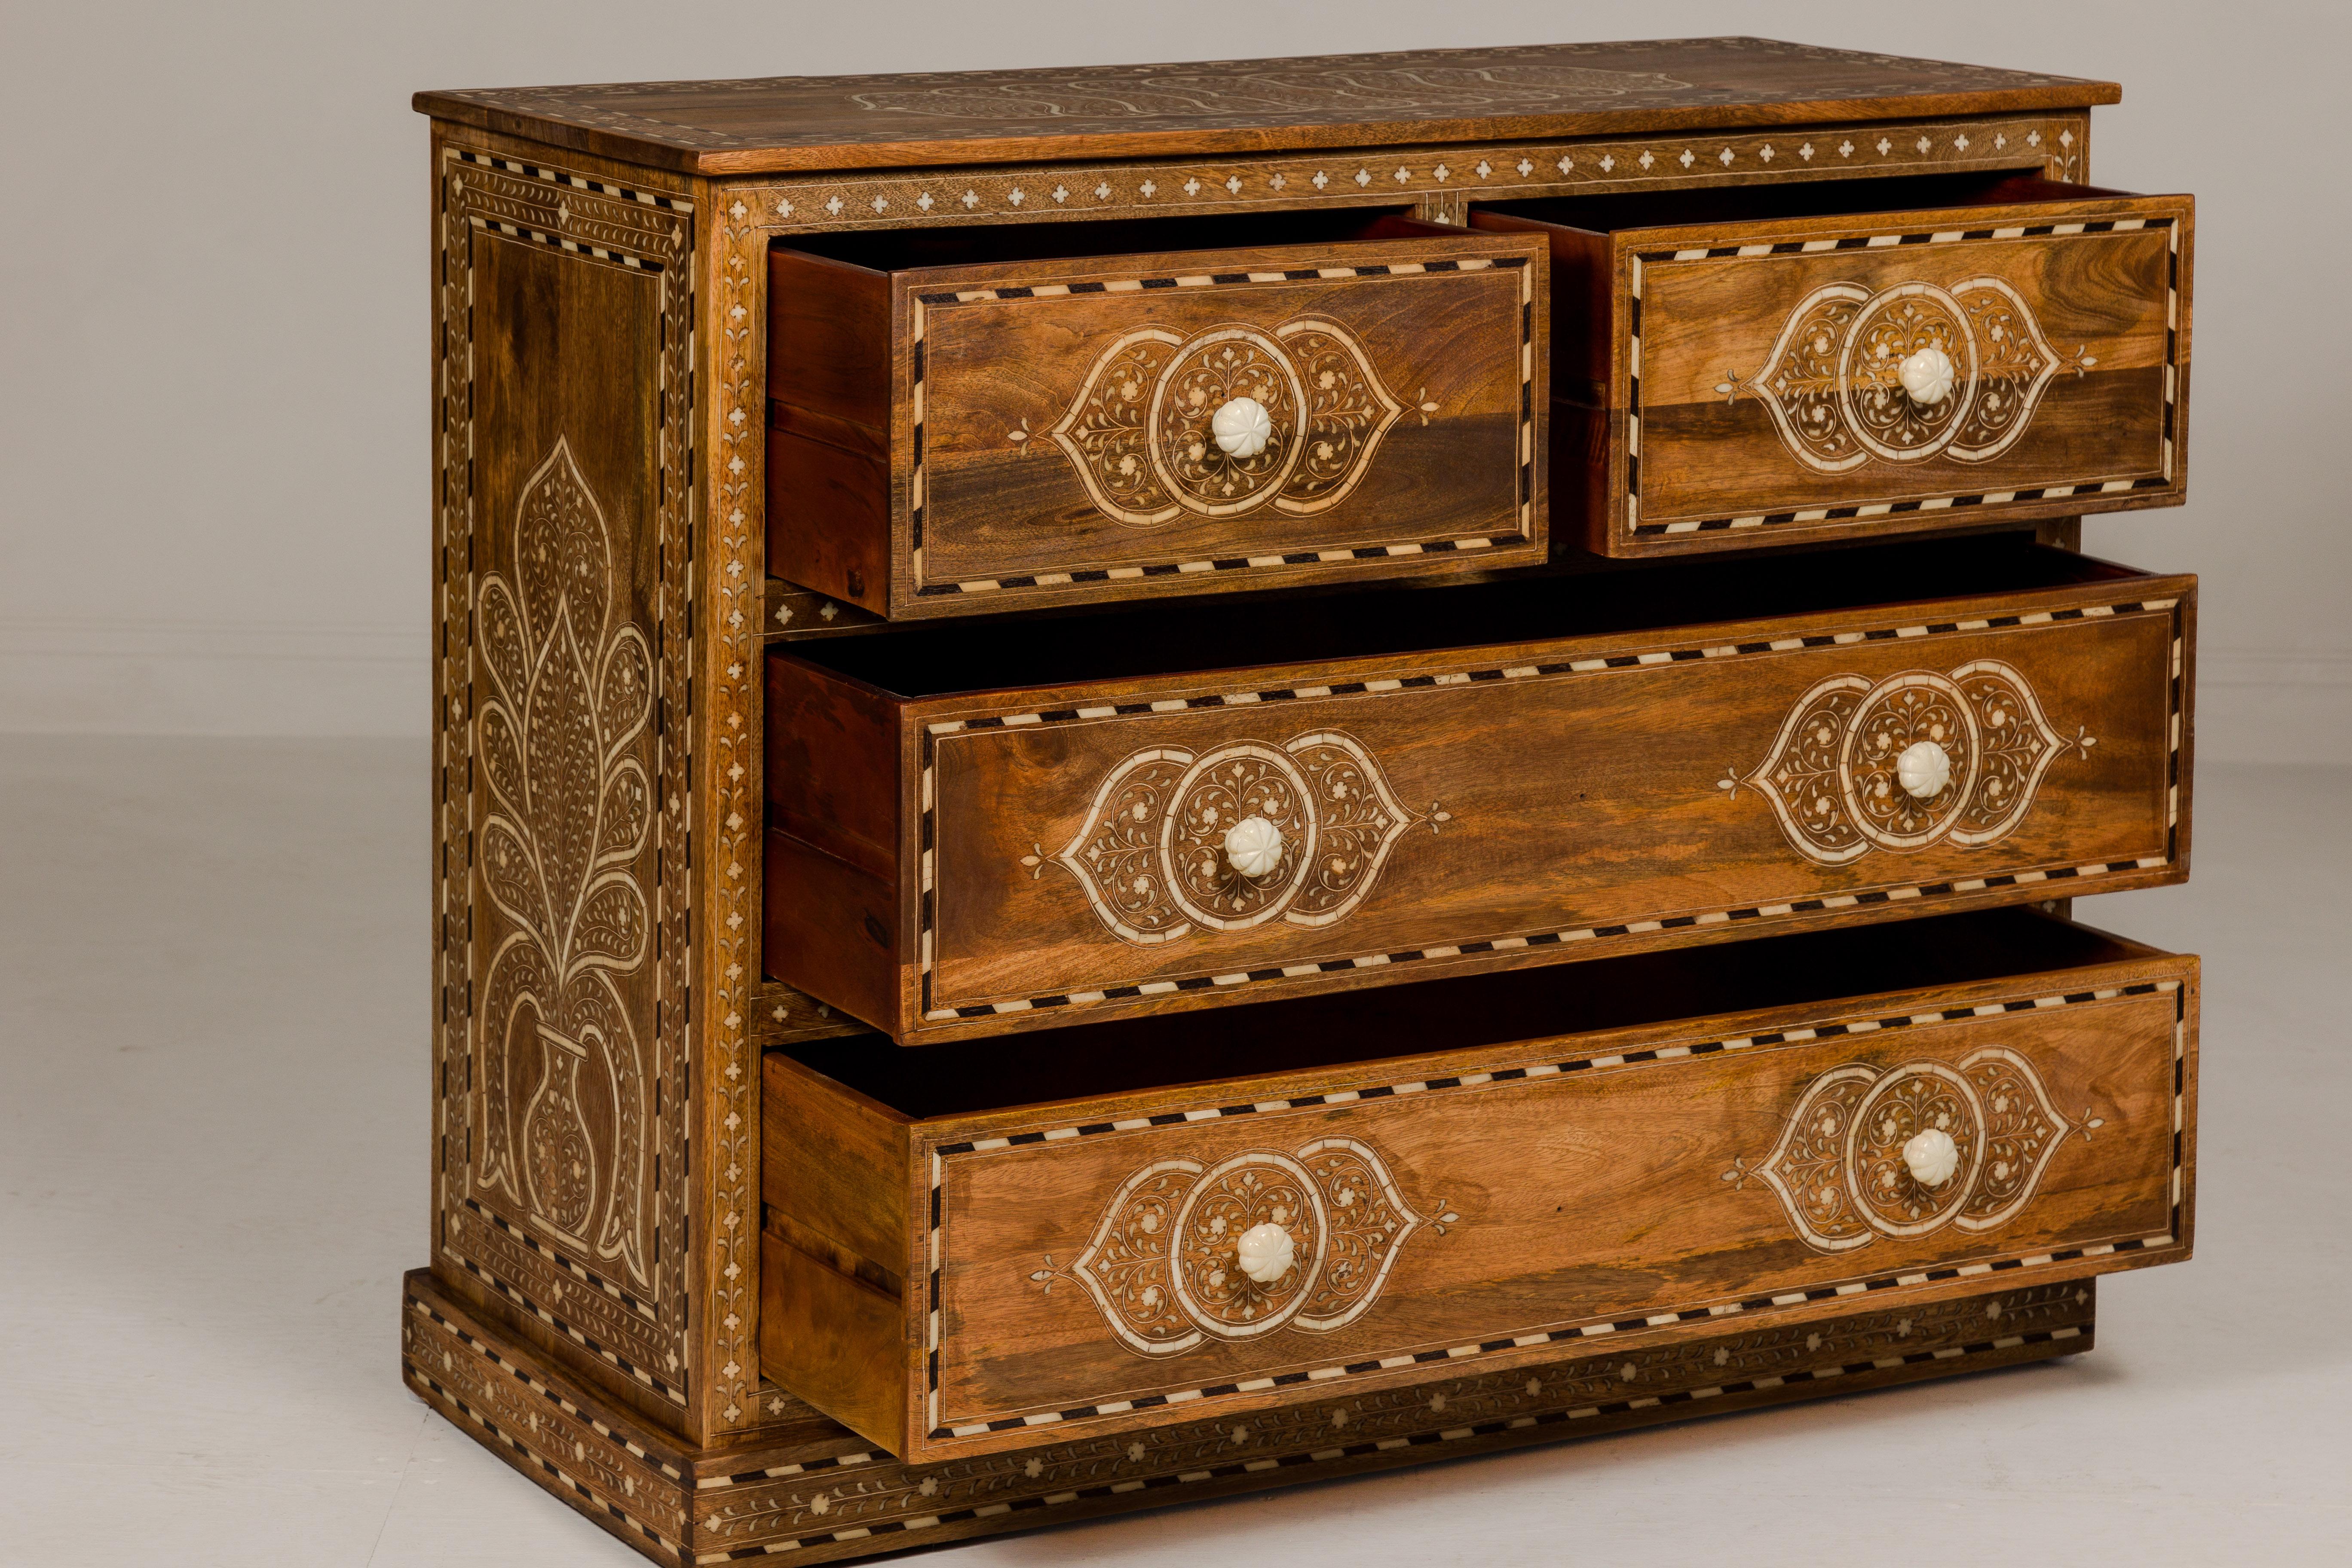 Anglo Indian Style Mango Wood Chest with Four Drawers and Floral Bone Inlay For Sale 6